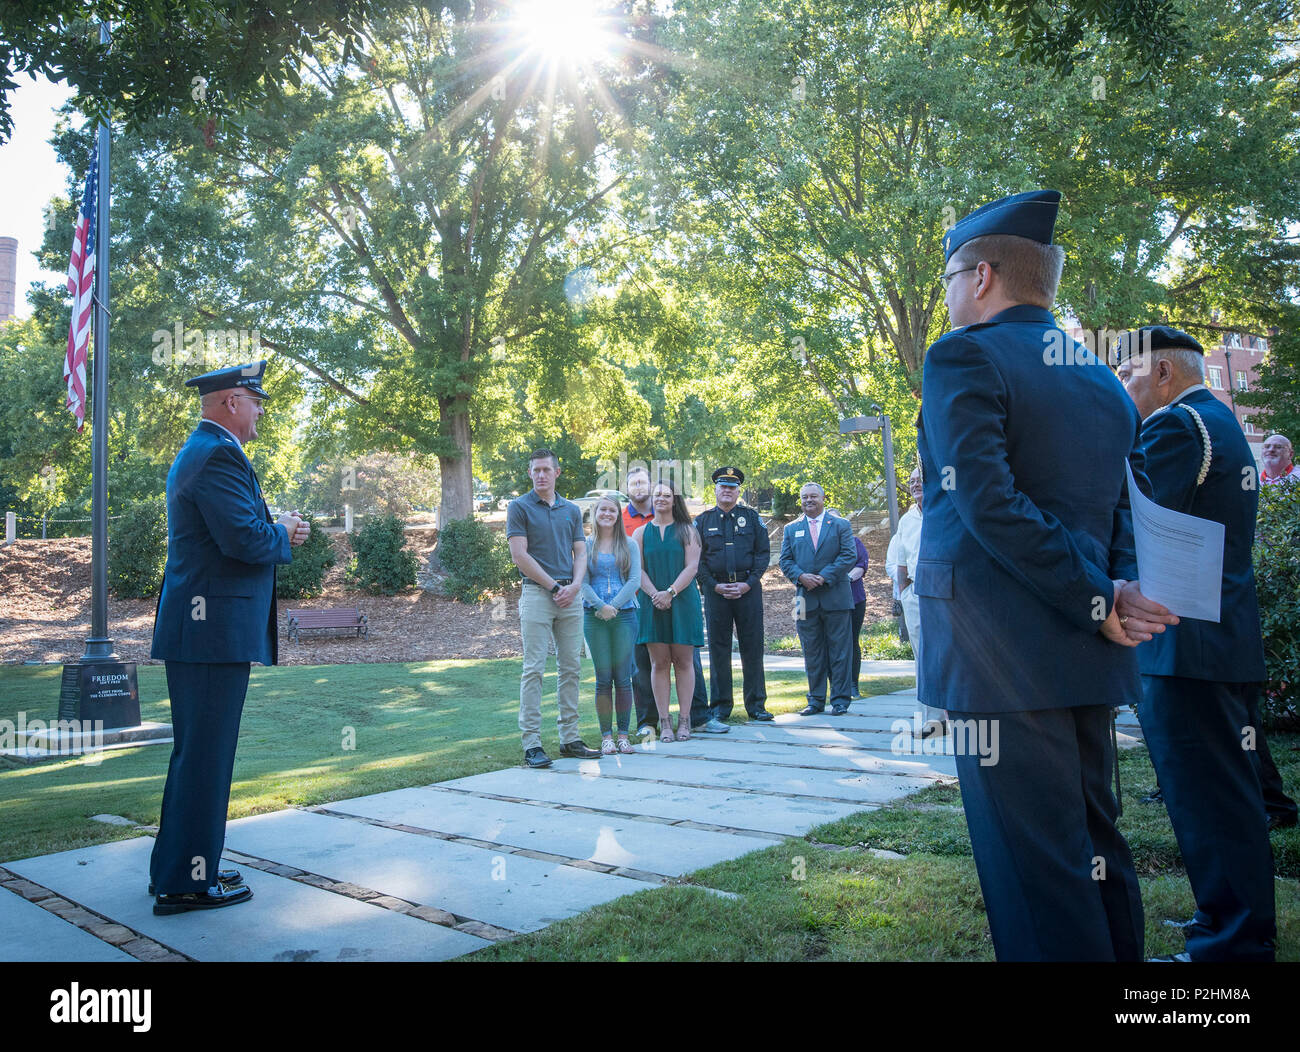 U.S. Air Force Lt. Col. Michael E. Mac Lain speaks to family and friends after his promotion ceremony at the Scroll of Honor in Clemson University’s Memorial Park, Sept. 30, 2016. Mac Lain is the Aeromedical Operations Flight Commander for the 43rd  Aeromedical Evacuation Squadron, Pope Army Airfield, Fort Bragg, NC. He directs daily flight operations for 60 assigned personnel, and provides medical care as a Flight Nurse on aeromedical evacuation missions. Mac Lain has deployed nine times to combat zones and successfully aero medically evacuated over 700 of the most ill and severely injured Am Stock Photo